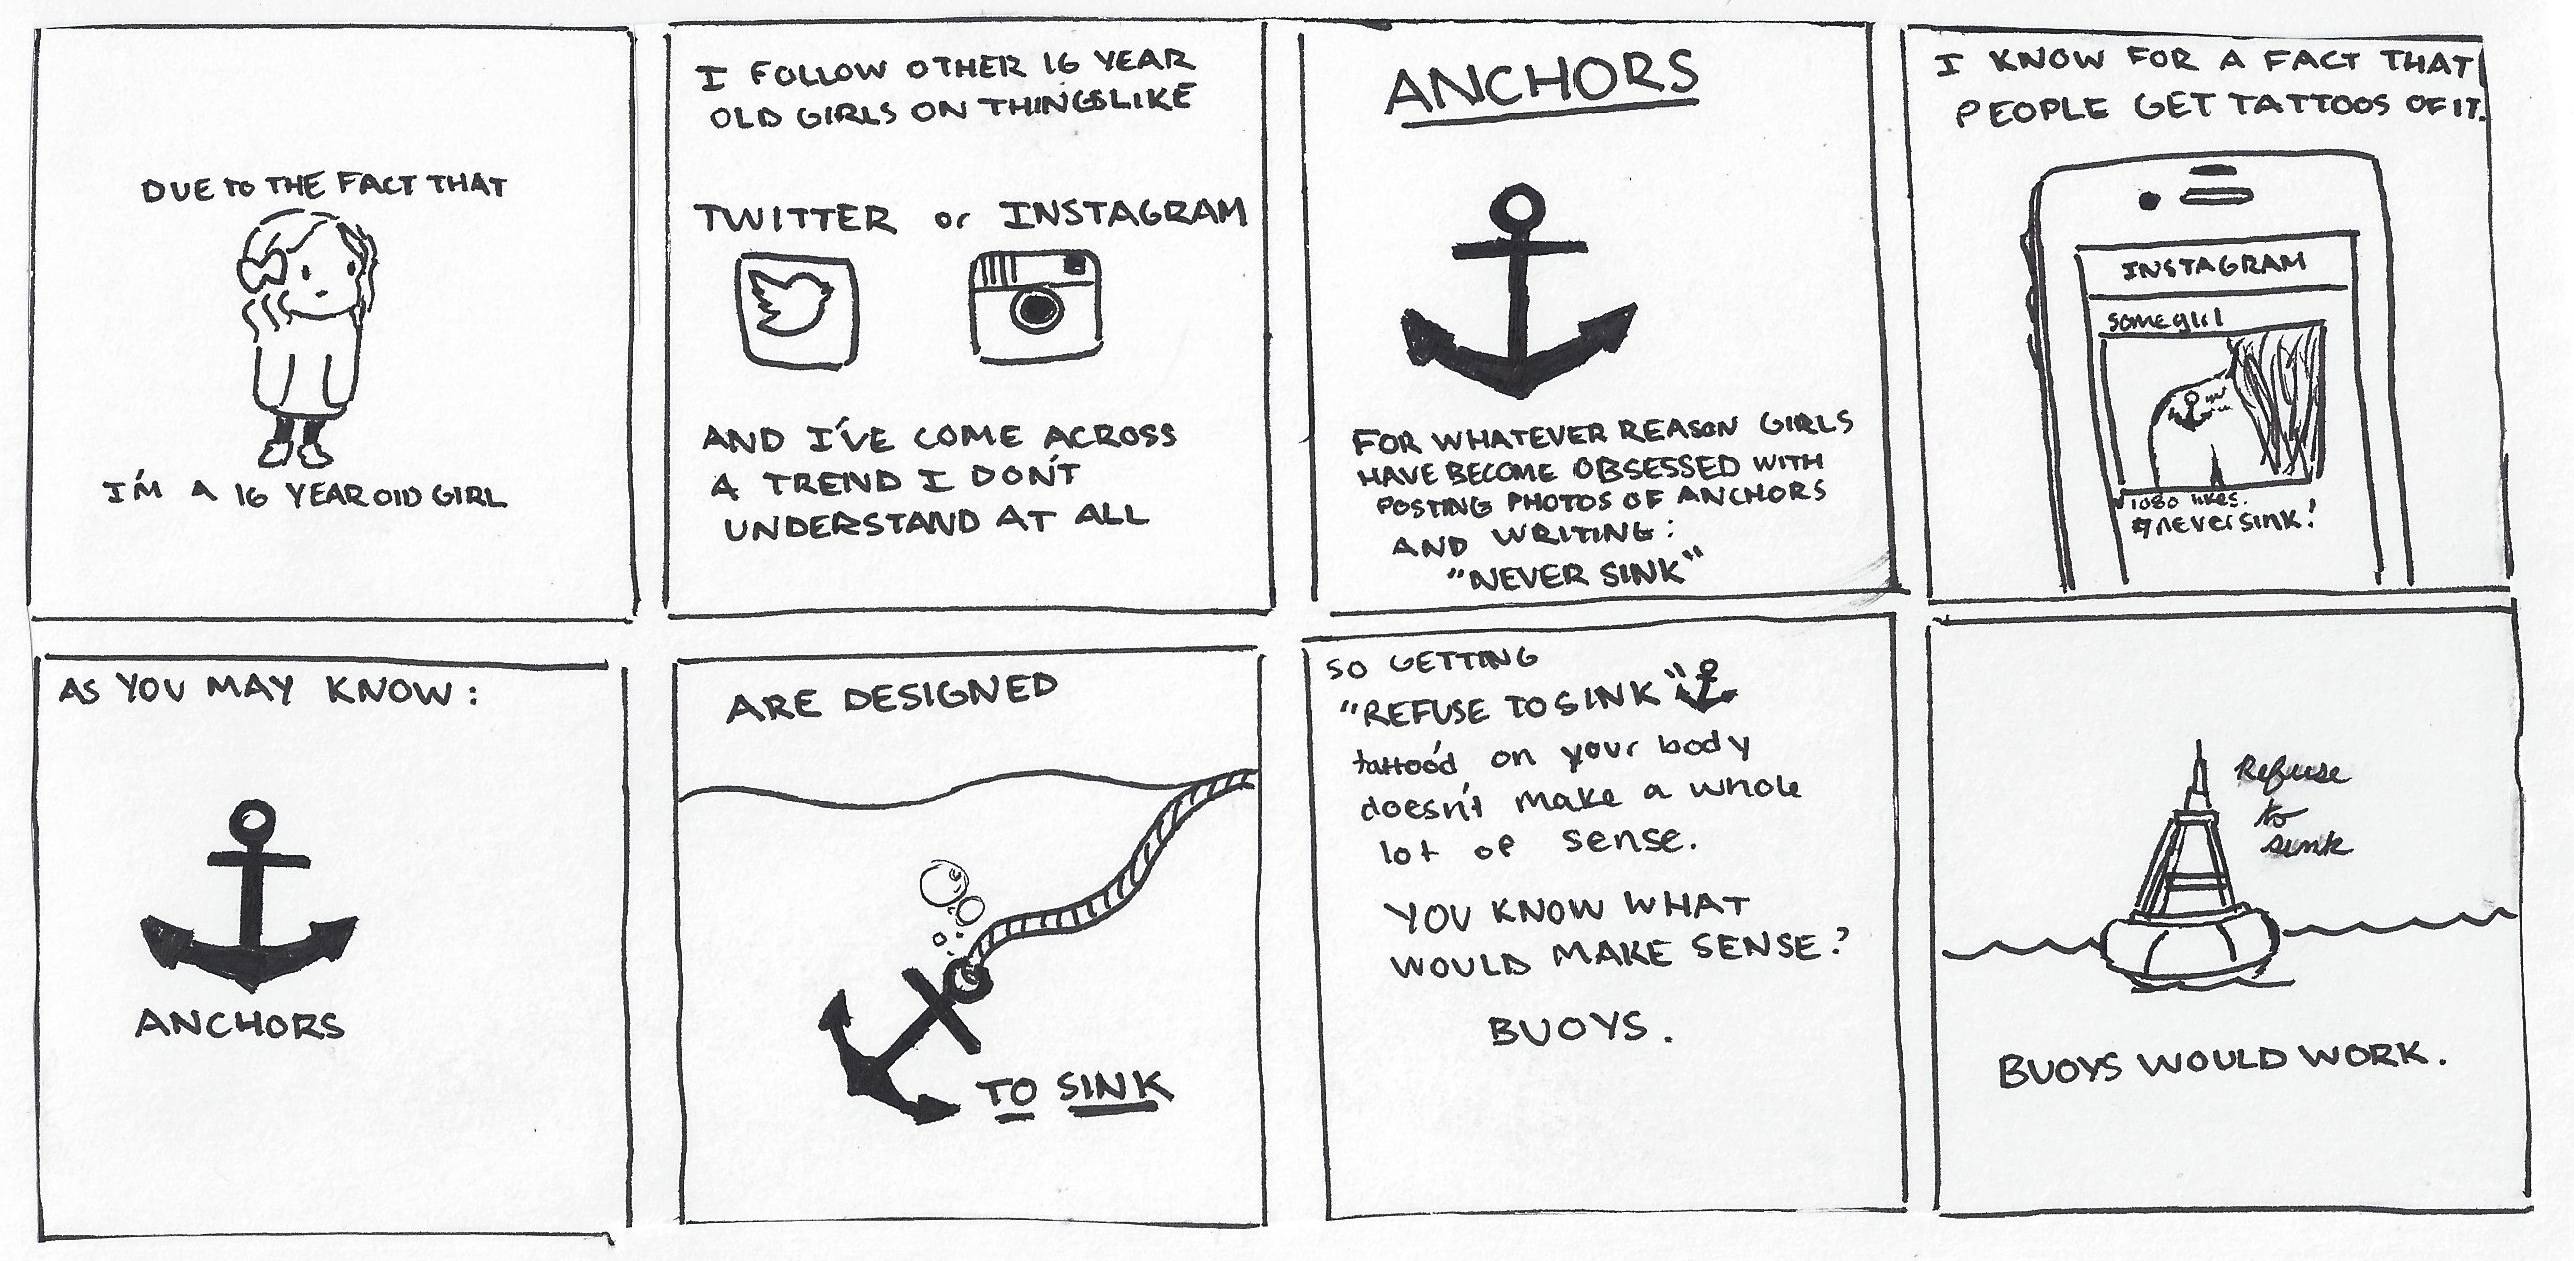 anchor funny - I Other 16 Year Old Girls On Thing Anchors Know For A Fact That People Get Tattoos Of It. Due To The Fact That Twitter Instagram 1 Instagram t Ae Av Year 10 Girl And I'Ve Come Across A Trend I Dont Understand At All Fo Whatever Reagon Girls